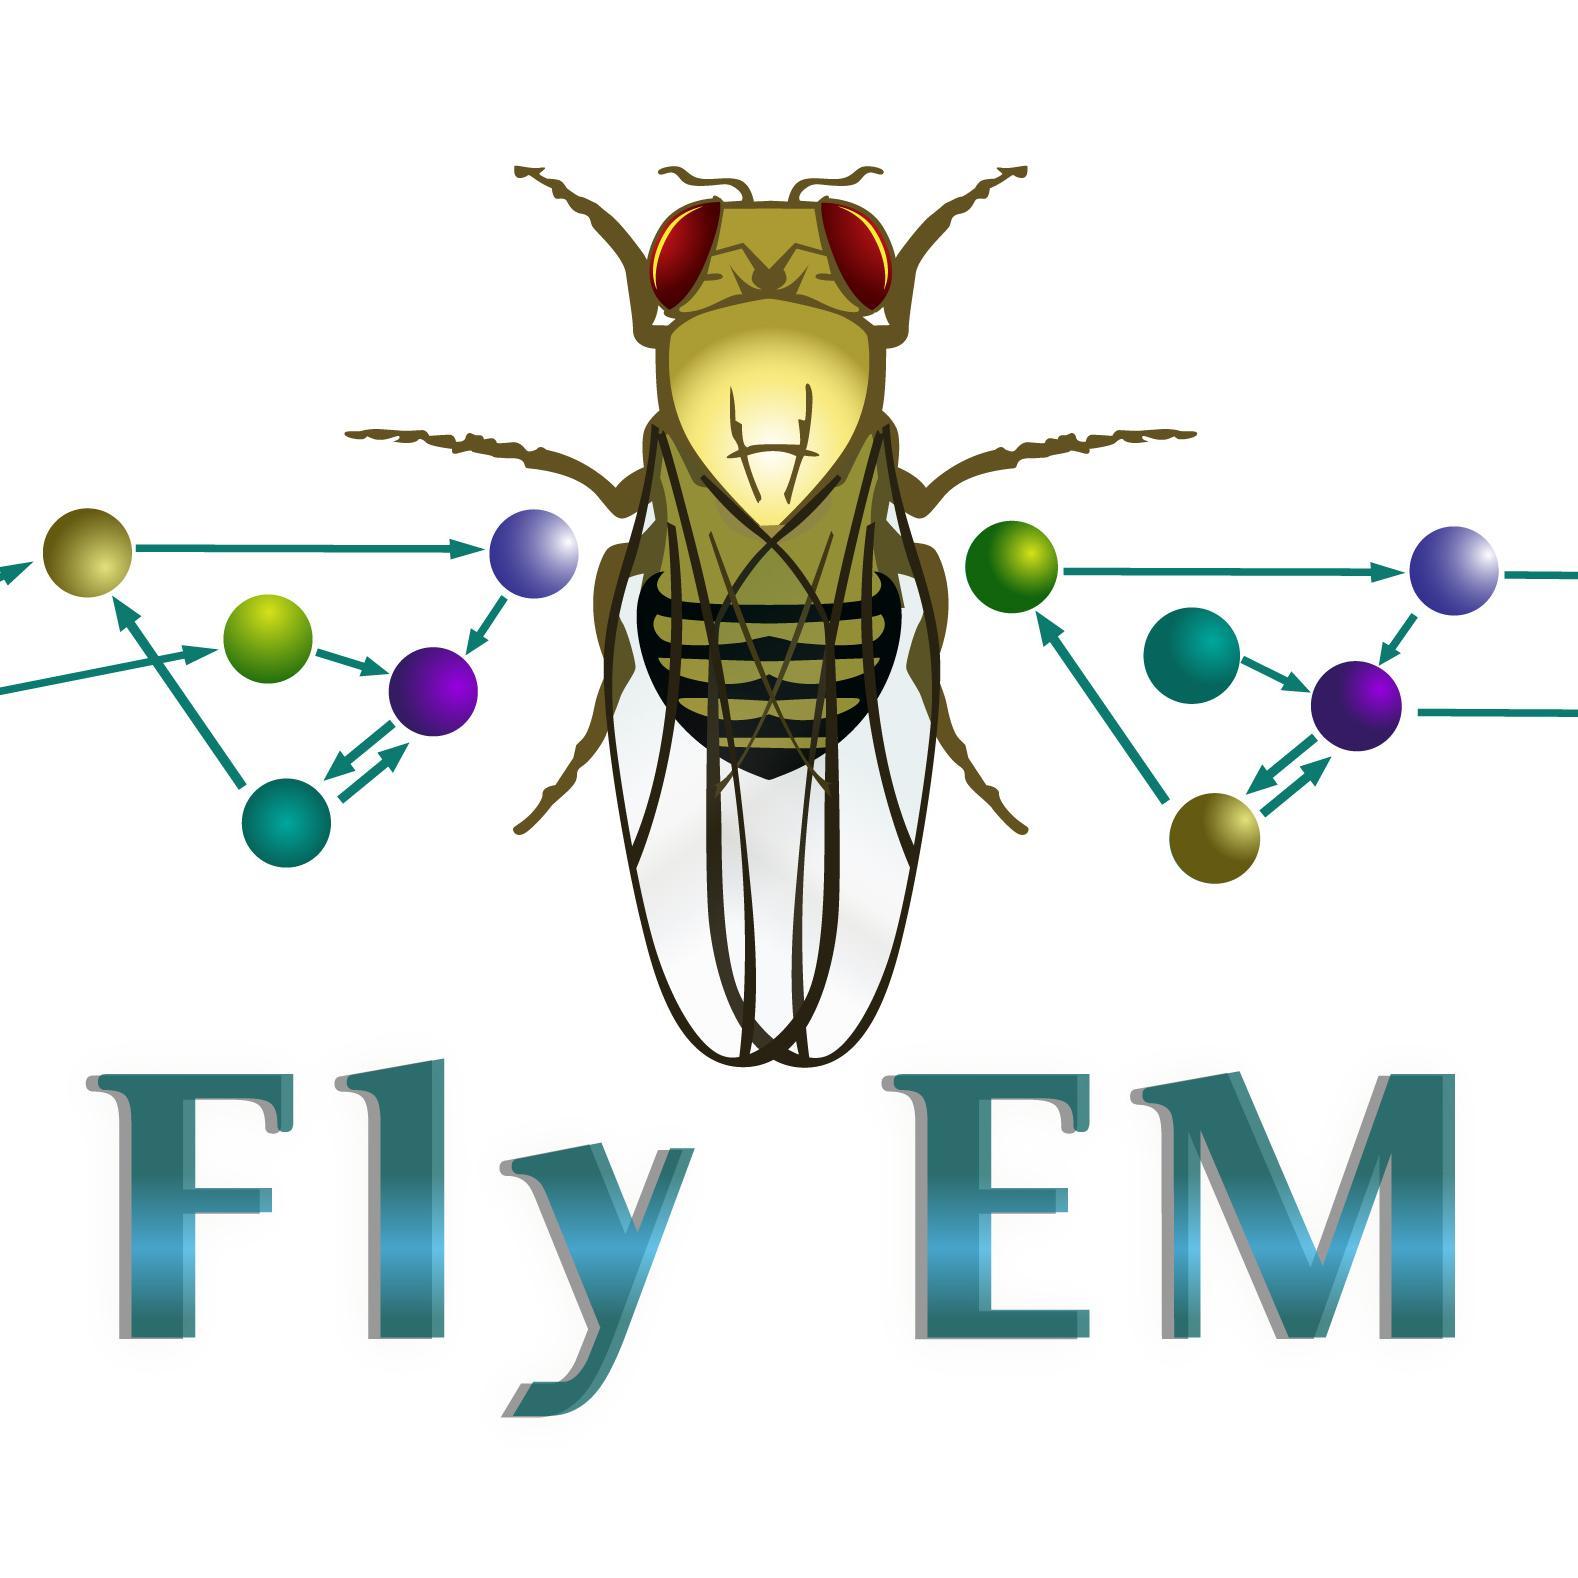 Follow for the latest info on the Janelia Fly EM project. Fly EM is a research team @HHMIJanelia that extracts and analyzes neural connections in the fly brain.